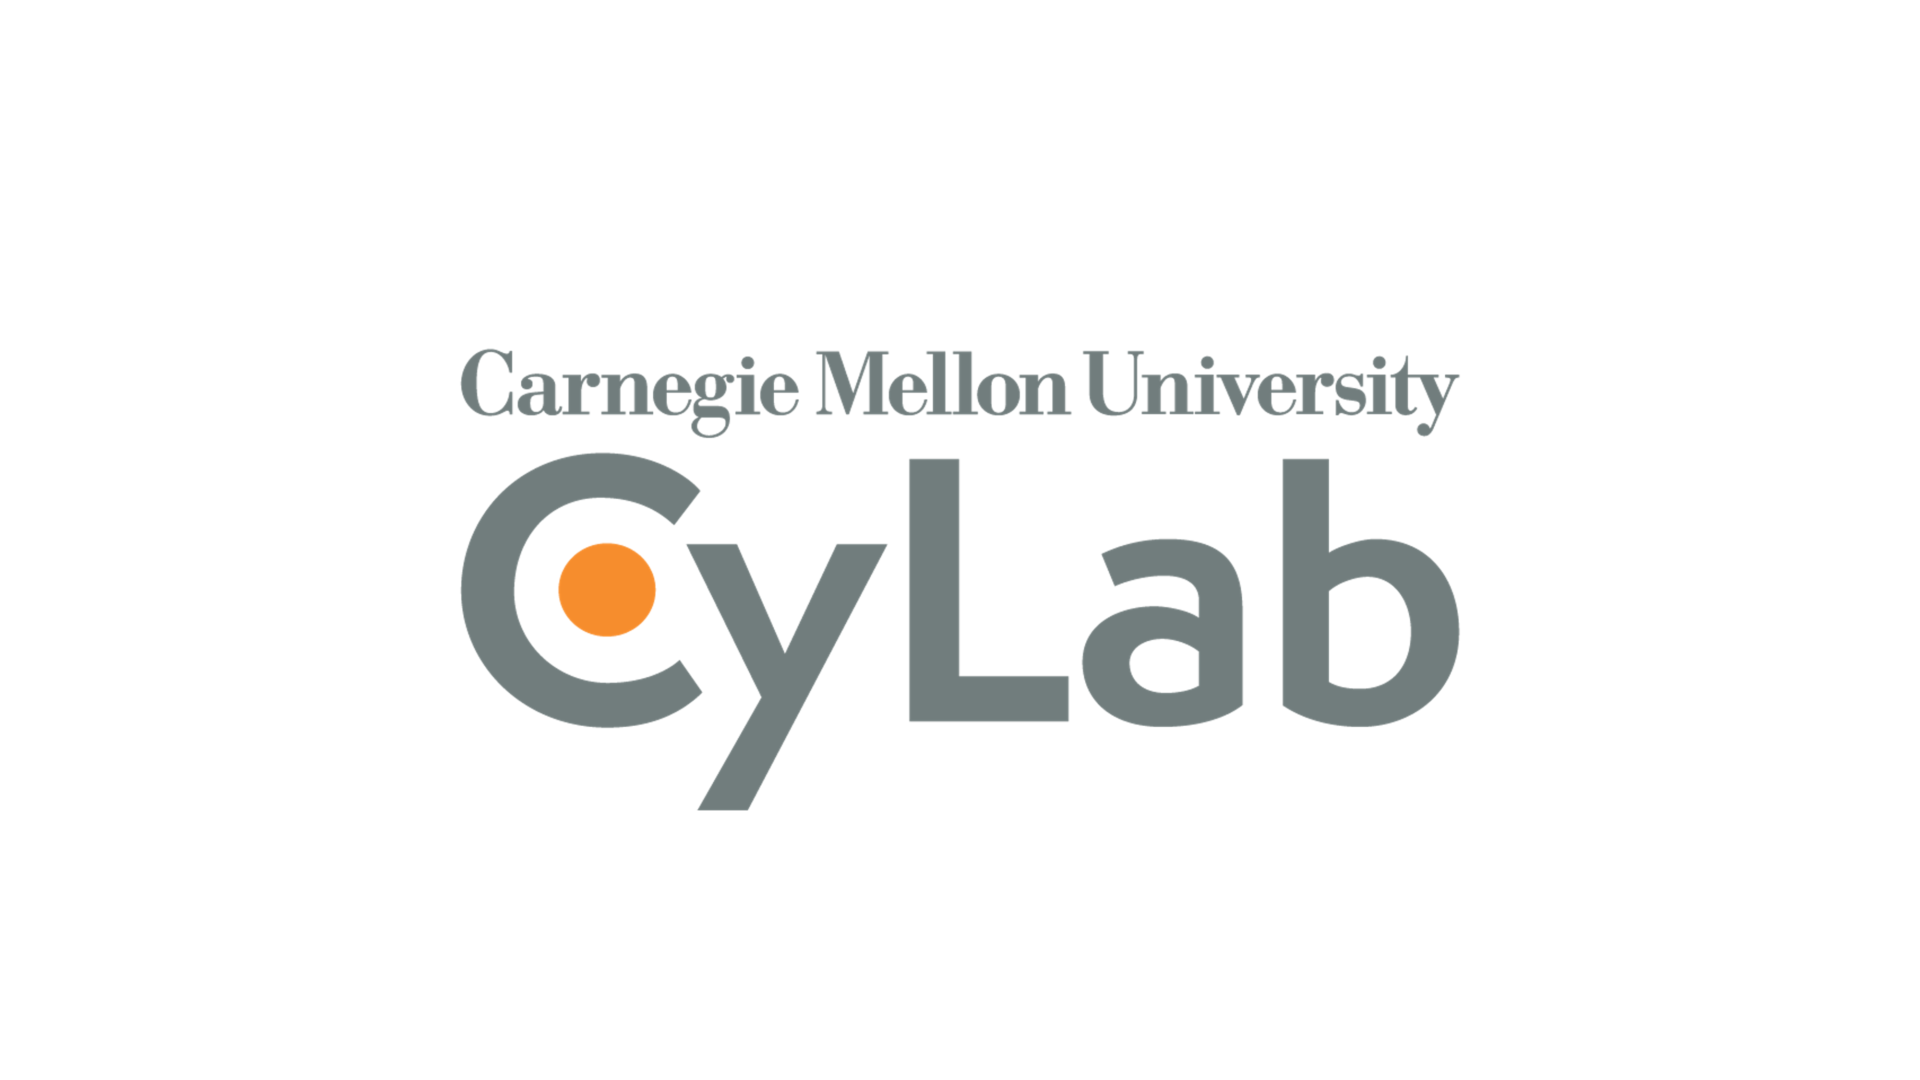 Cylab Institute by Carnegie Mellon